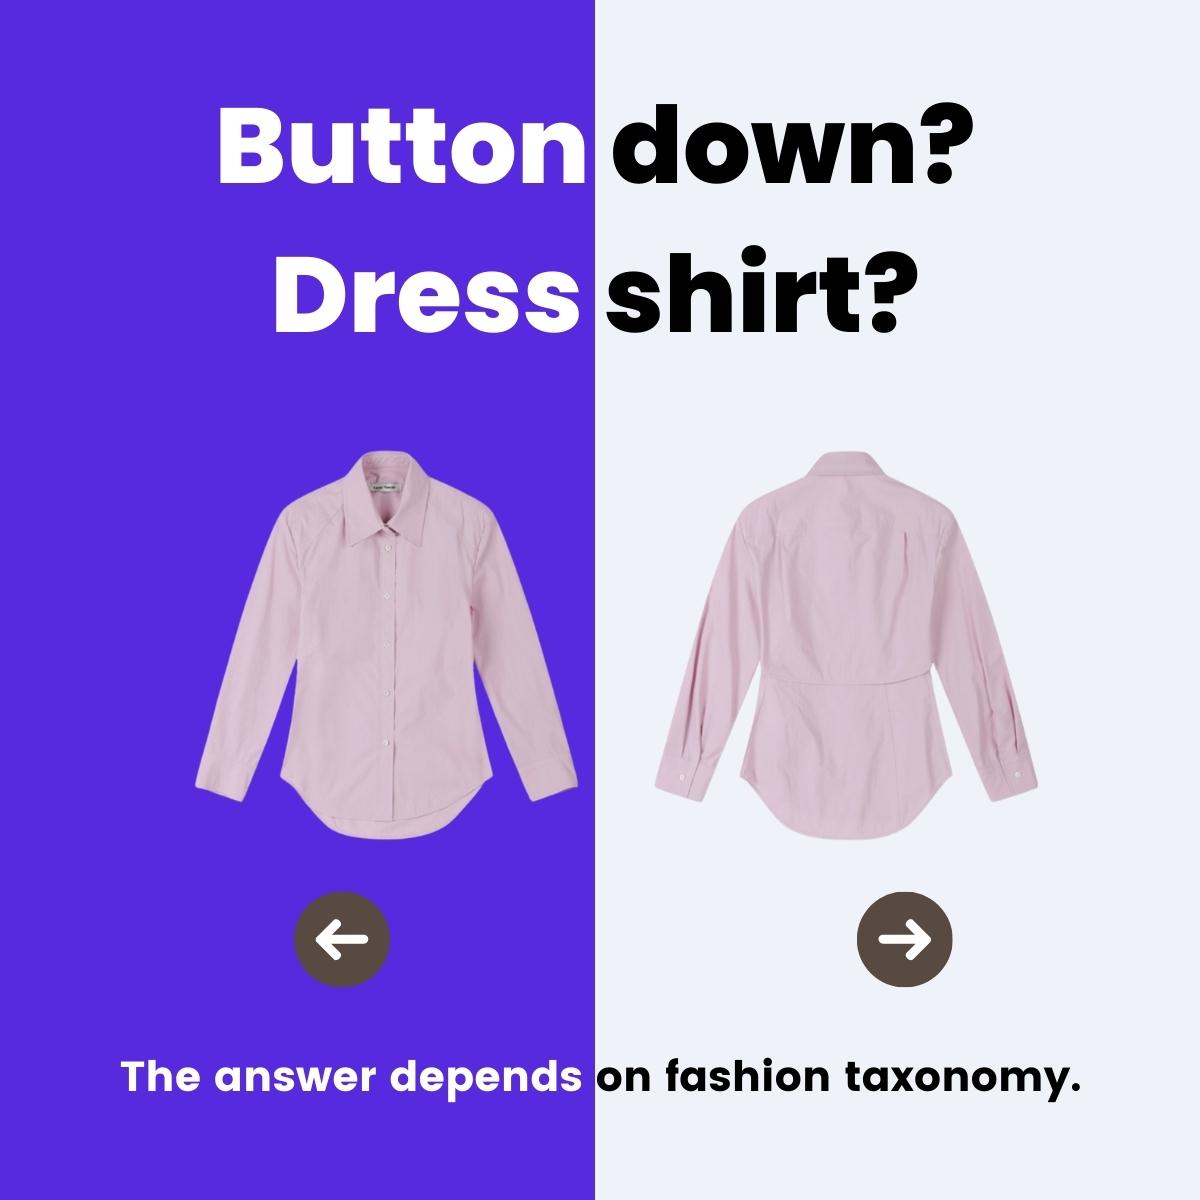 A split purple and white image two shirts, and text "button down" or "dress shirt"